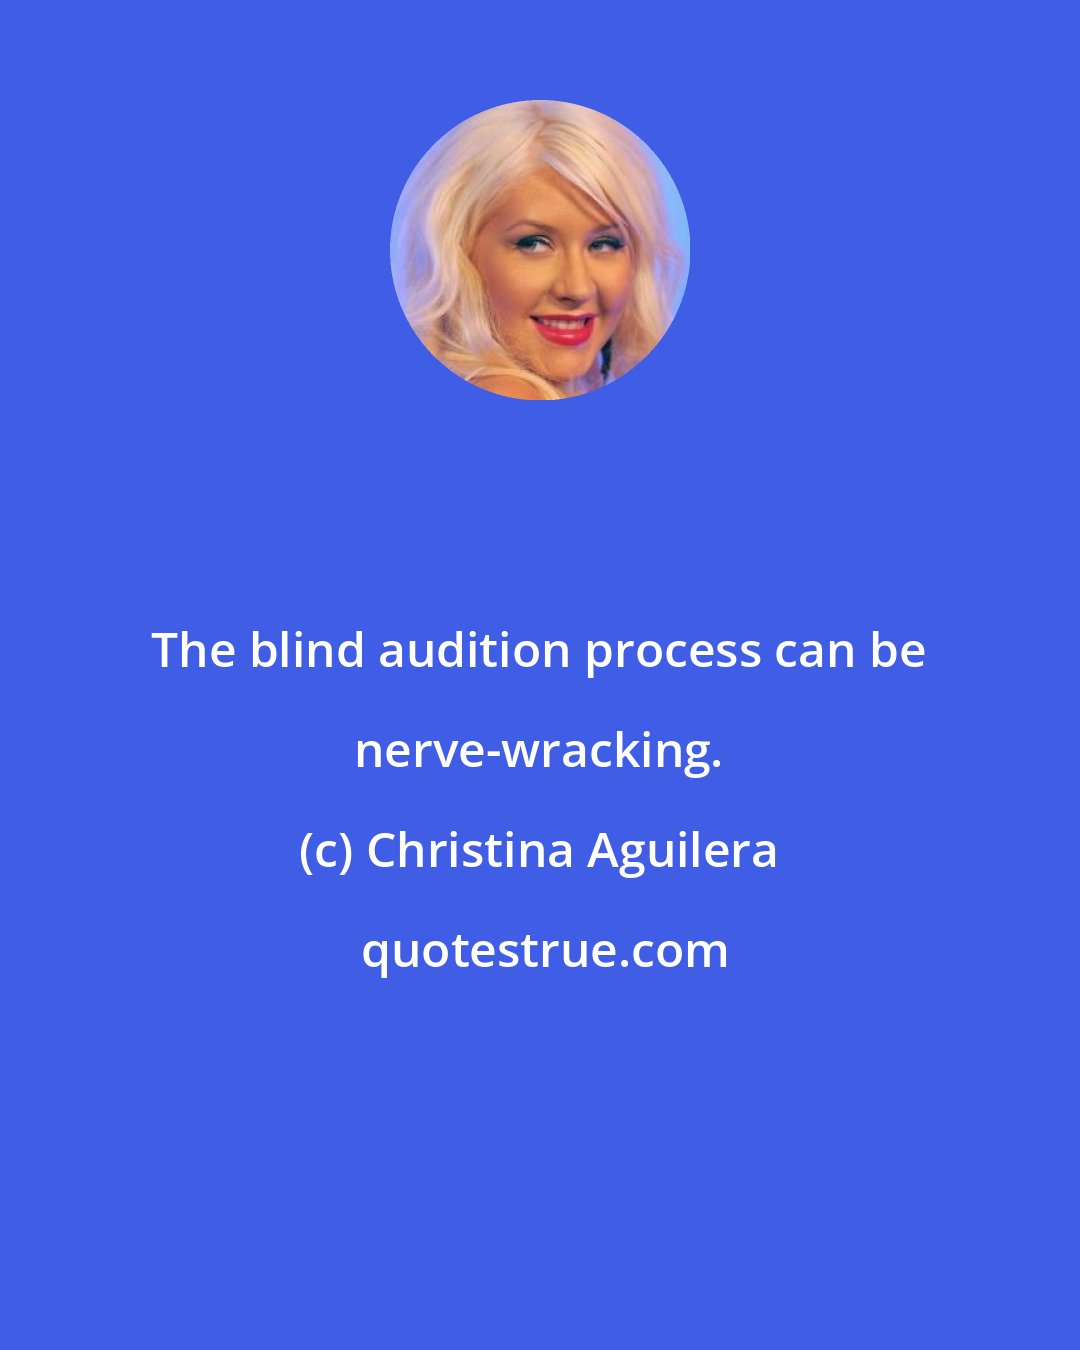 Christina Aguilera: The blind audition process can be nerve-wracking.